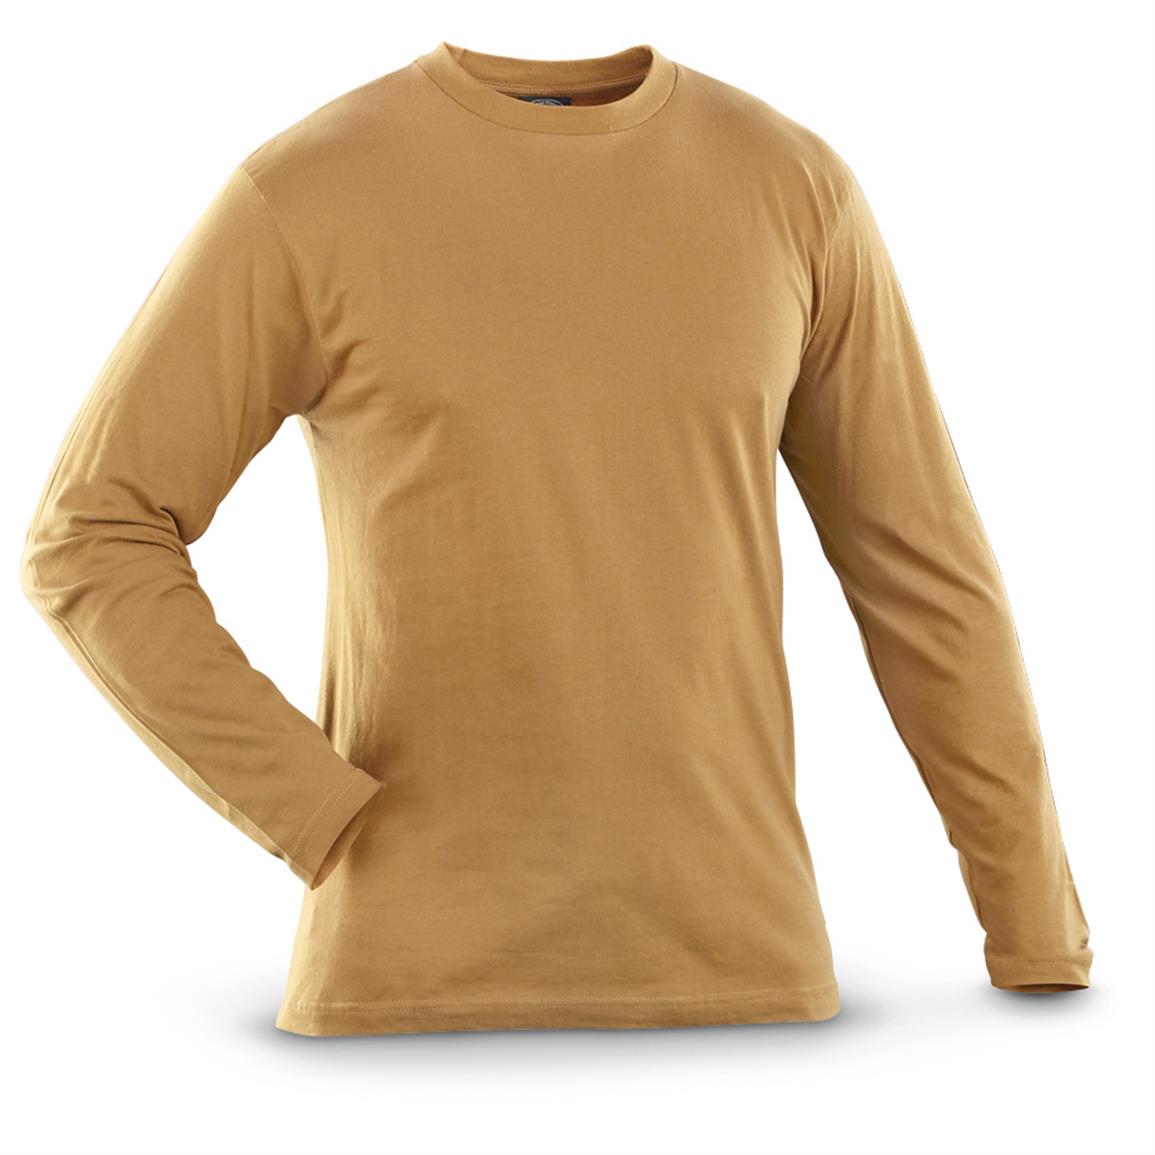 2 Mil-Tec Long-sleeved T-shirts, Coyote Tan - 625269, Tactical Clothing at Sportsman's Guide